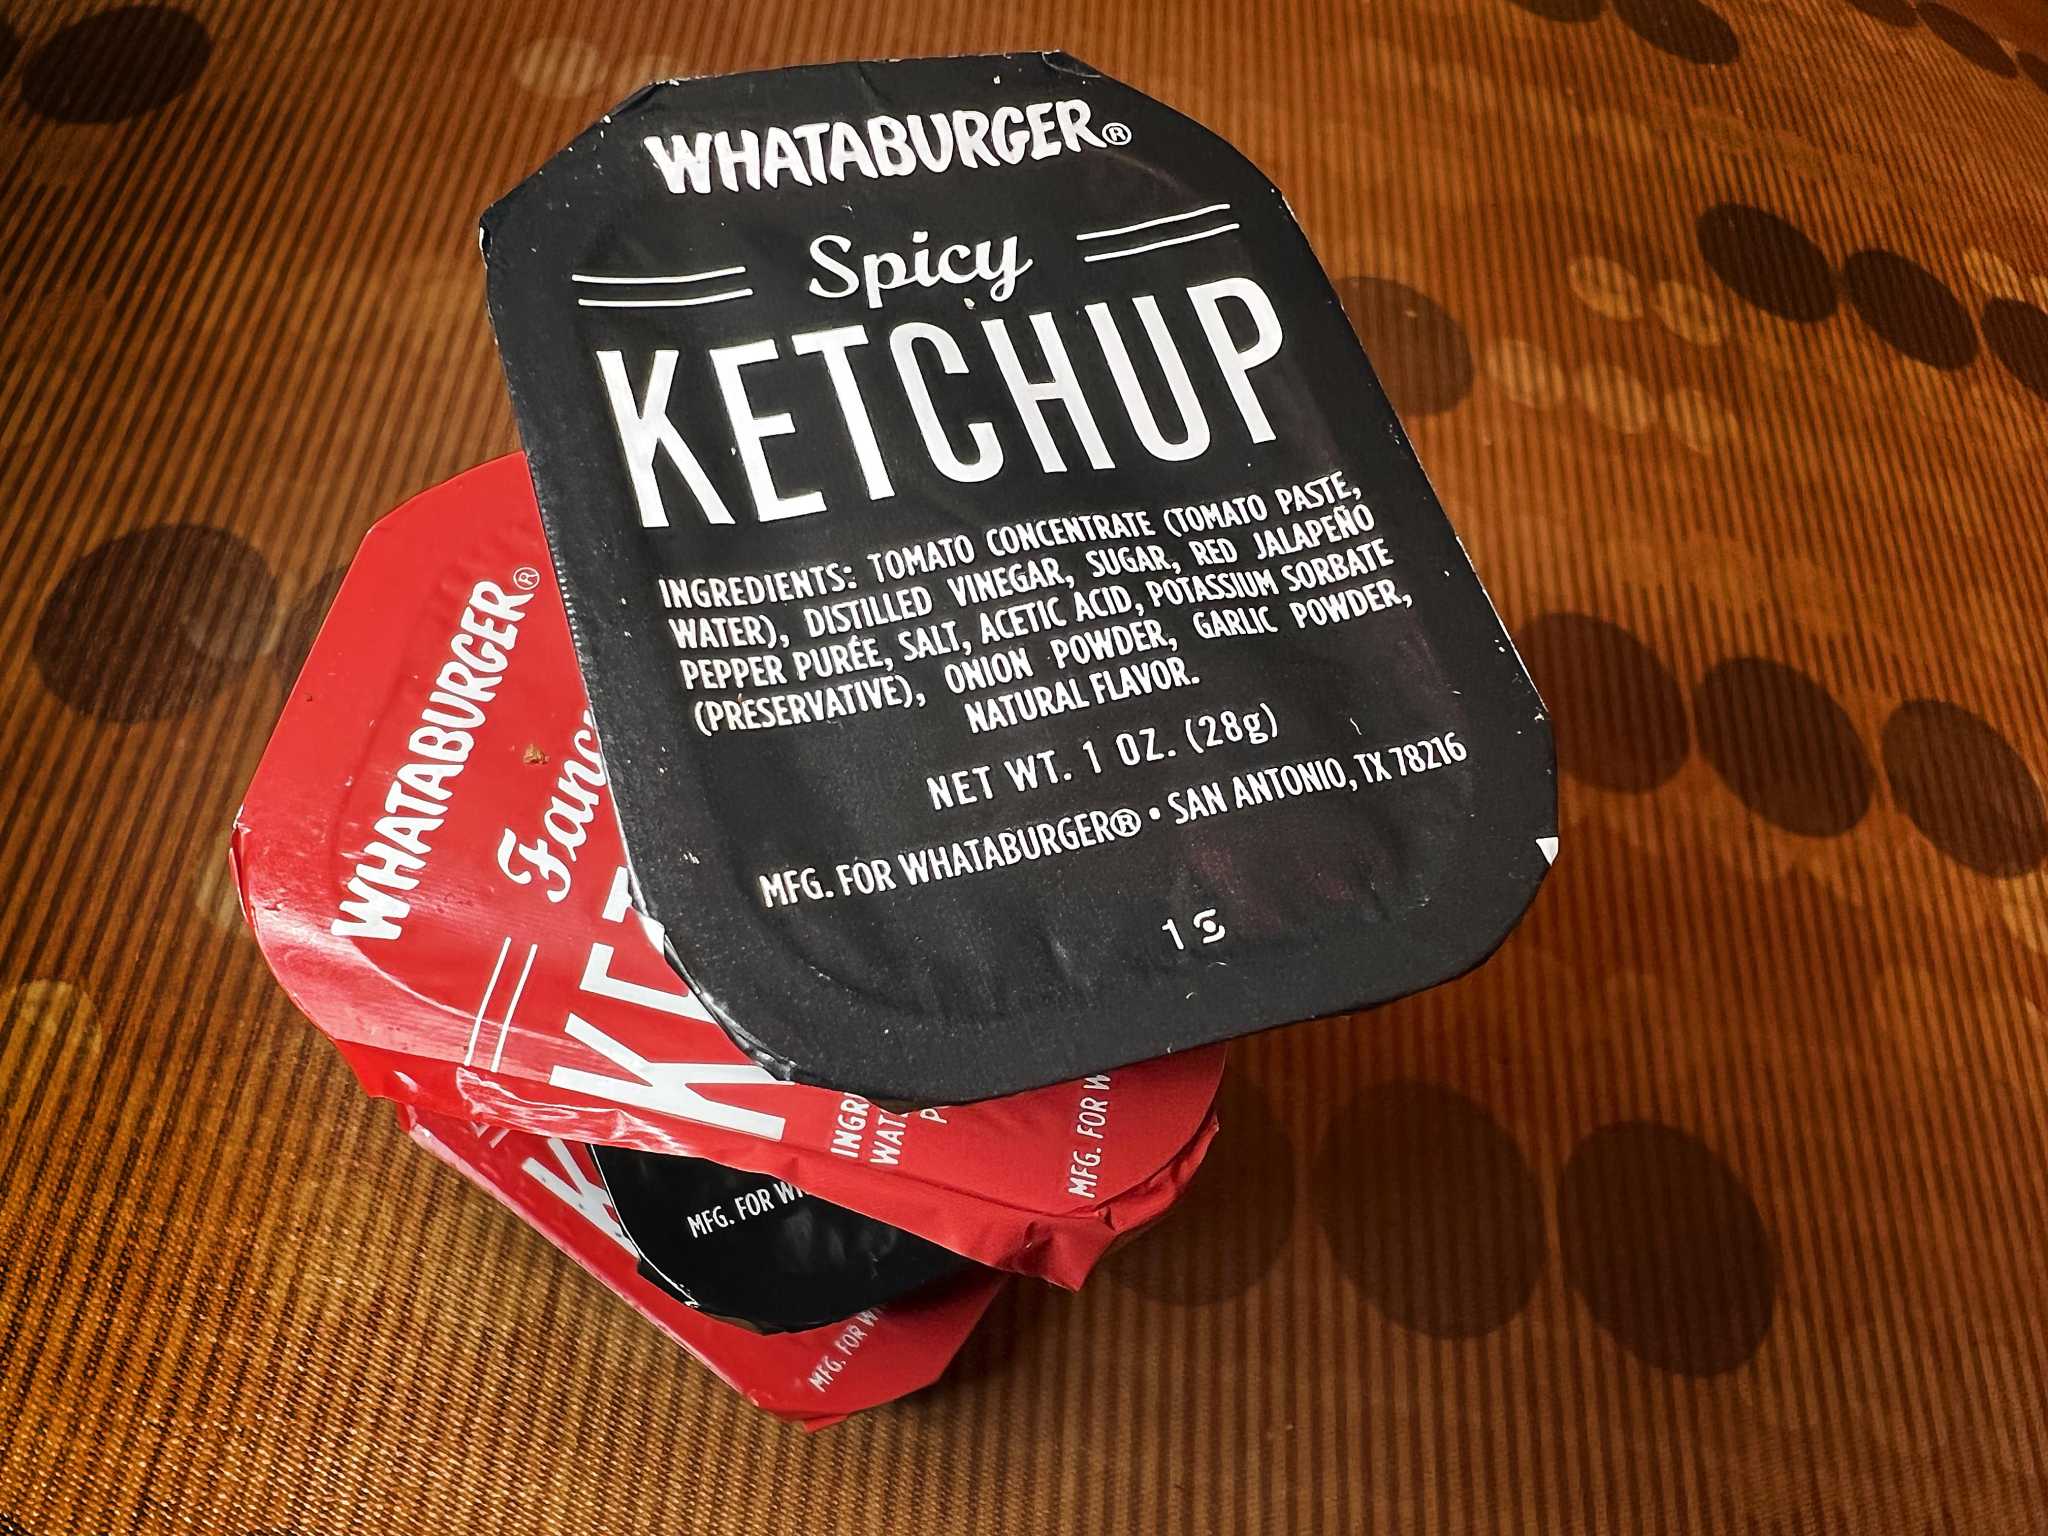 Whataburger sauces, foods to be sold in stores across U.S.